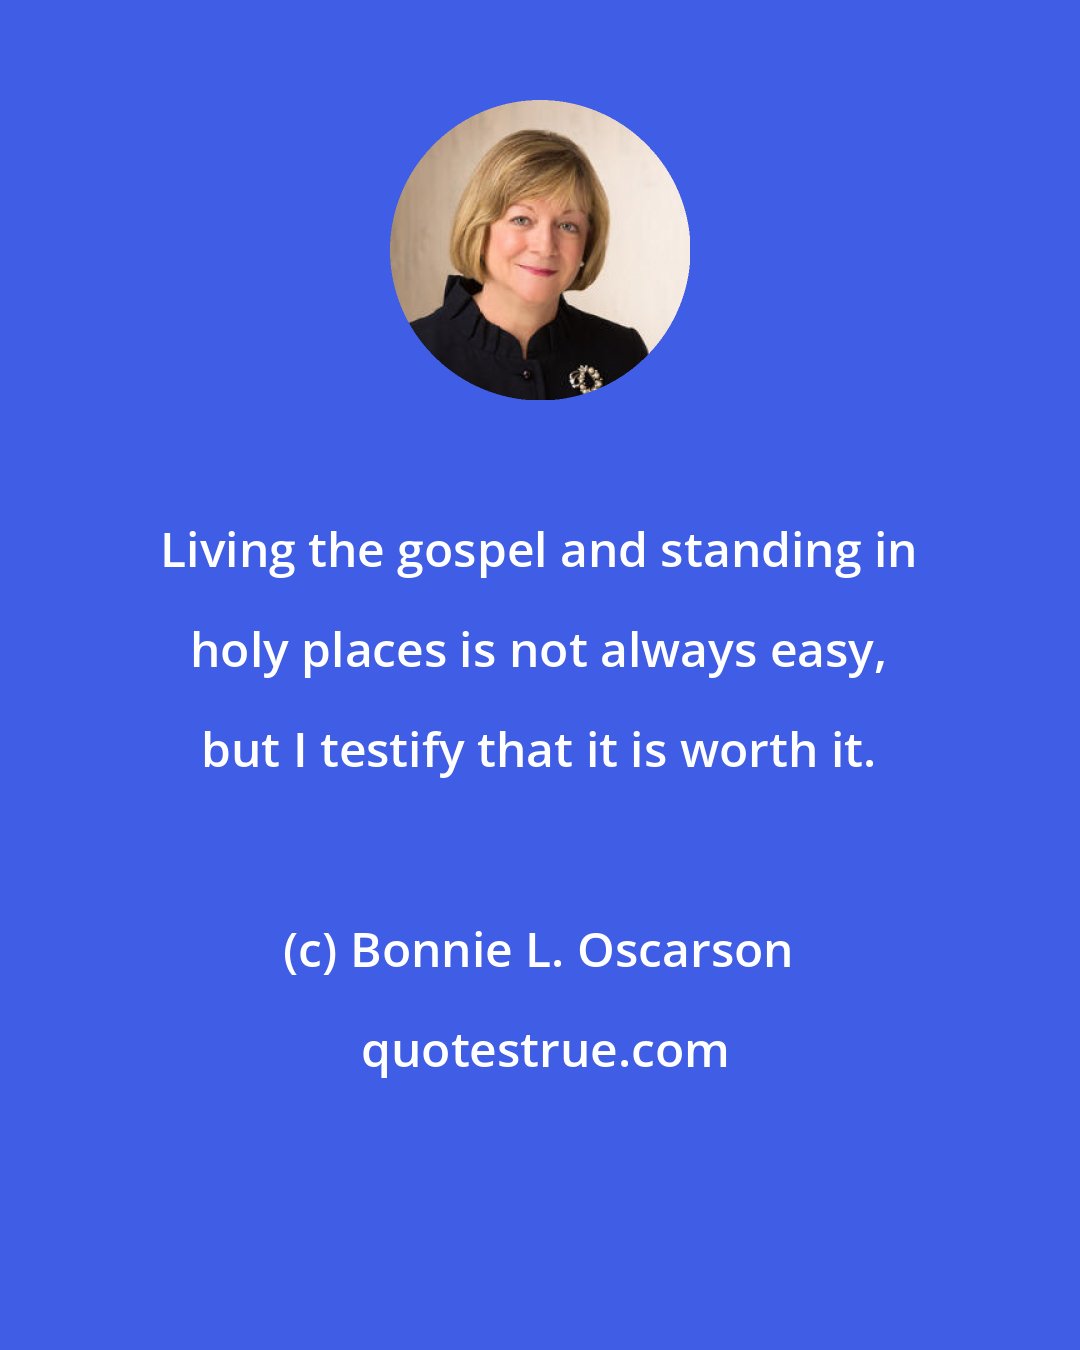 Bonnie L. Oscarson: Living the gospel and standing in holy places is not always easy, but I testify that it is worth it.